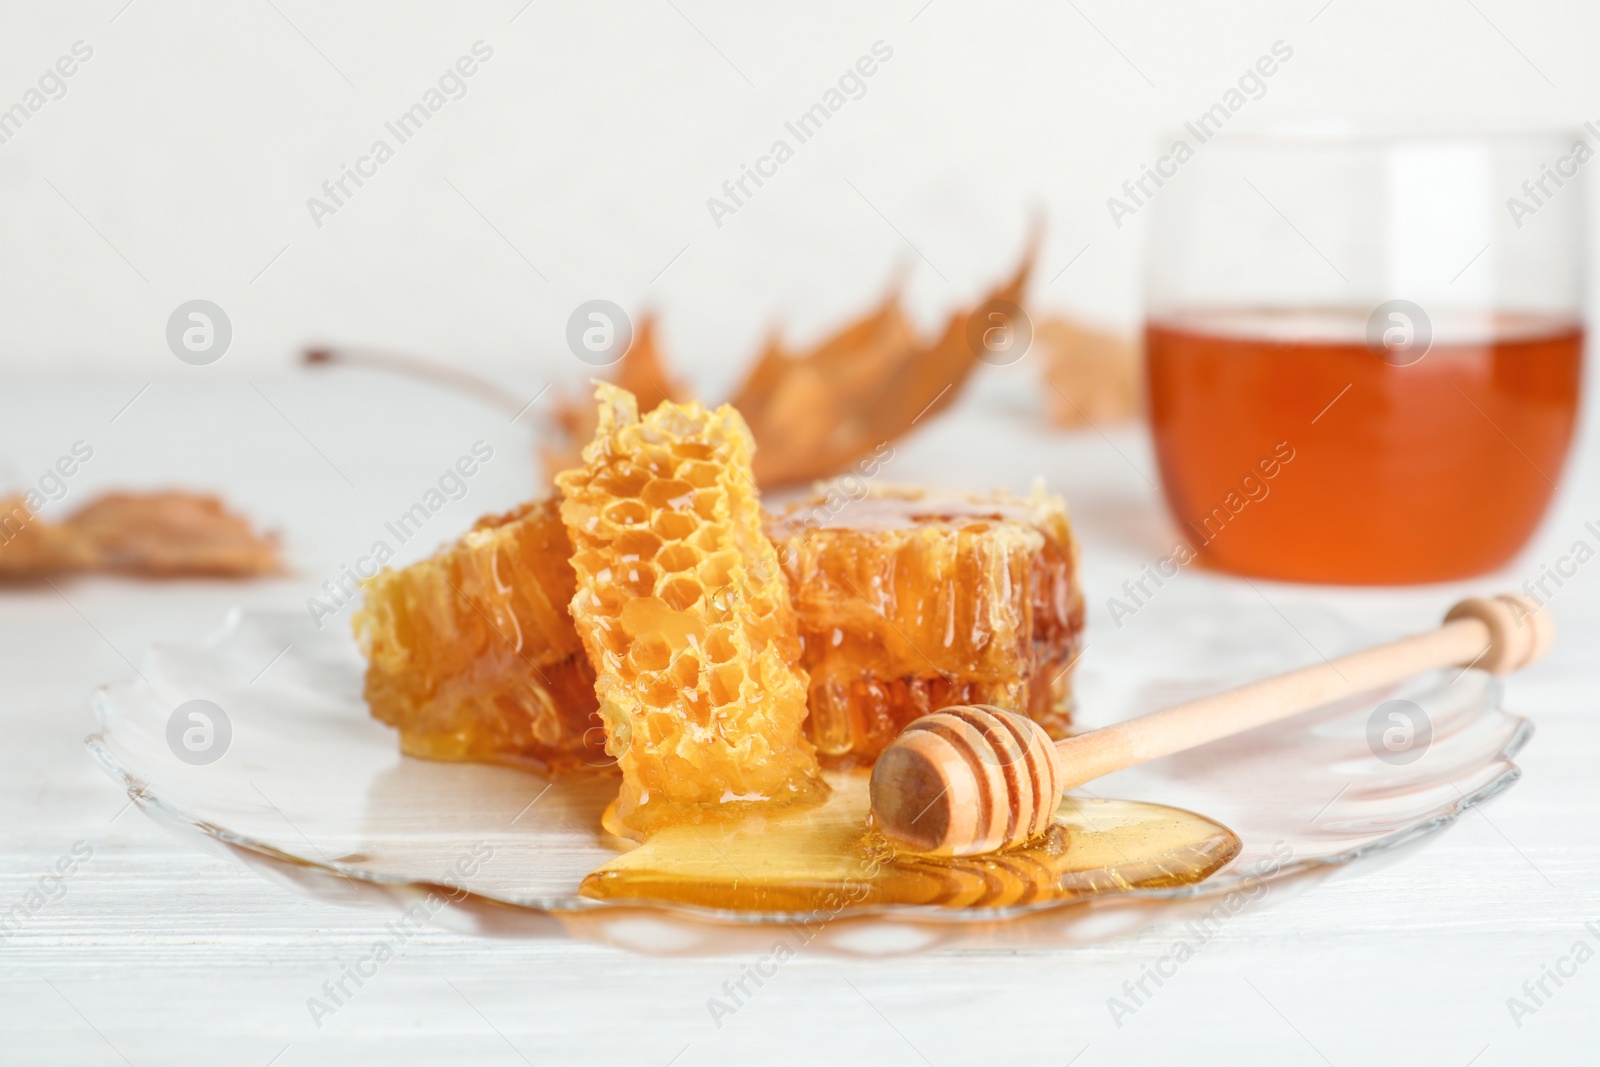 Photo of Plate with honeycomb pieces and dipper on table